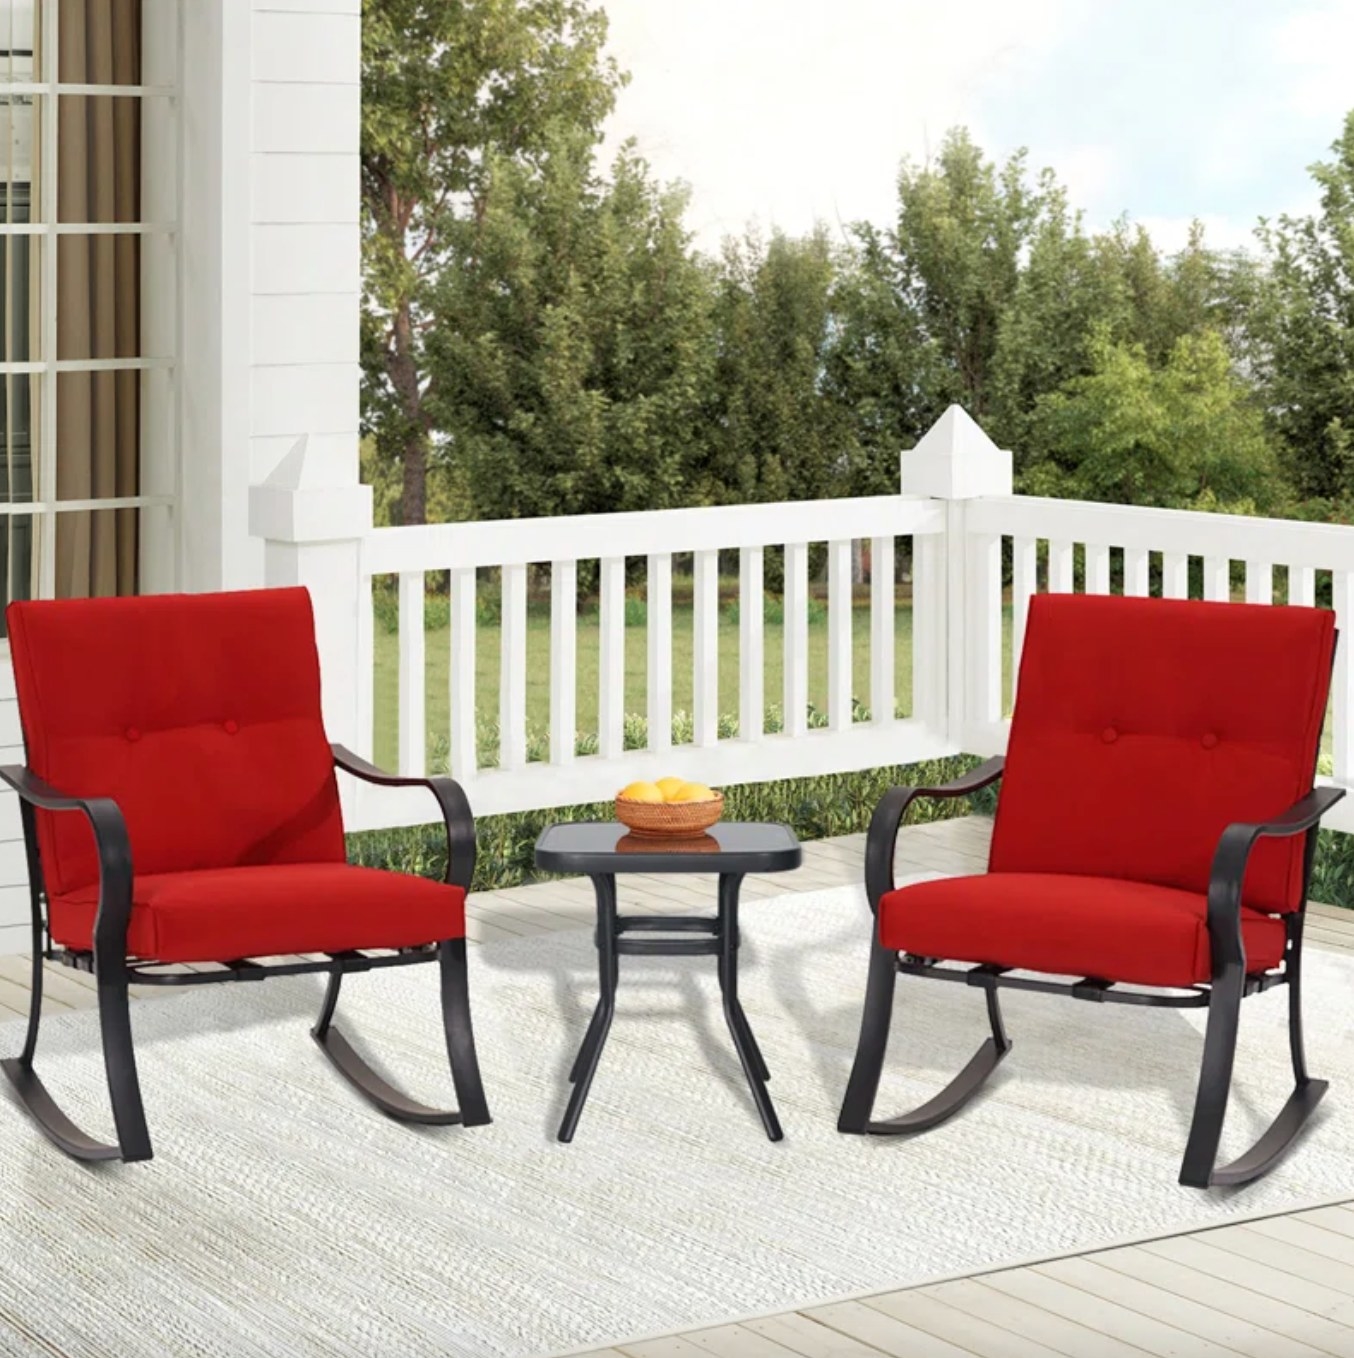 the black metal rocking chairs and small table. the chairs have red cushions, and the whole set is on a white porch in front of a yard and wooded area